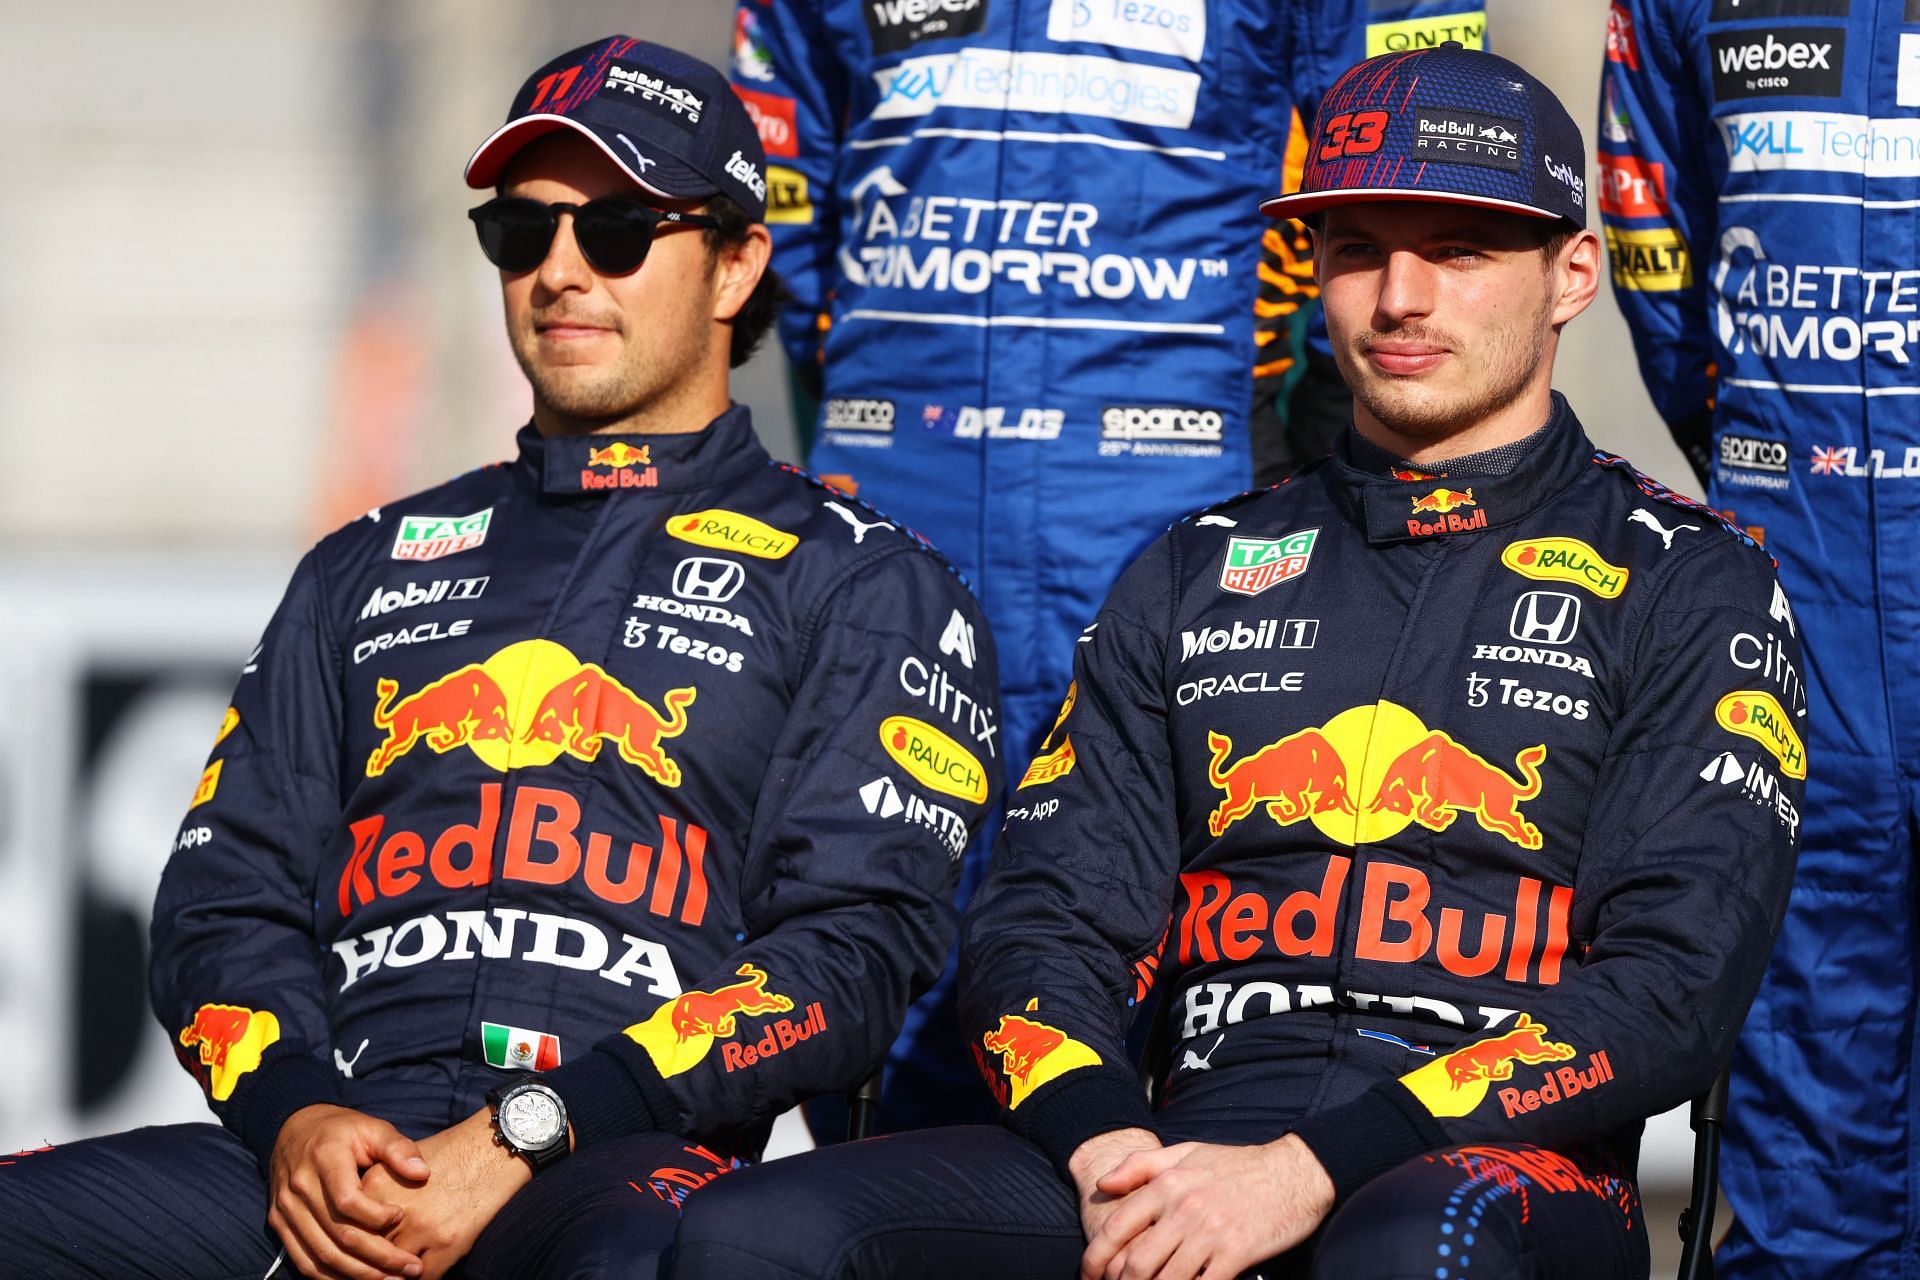 Sergio Perez (left) and Max Verstappen (right) became teammates in 2021 (Photo by Bryn Lennon/Getty Images)